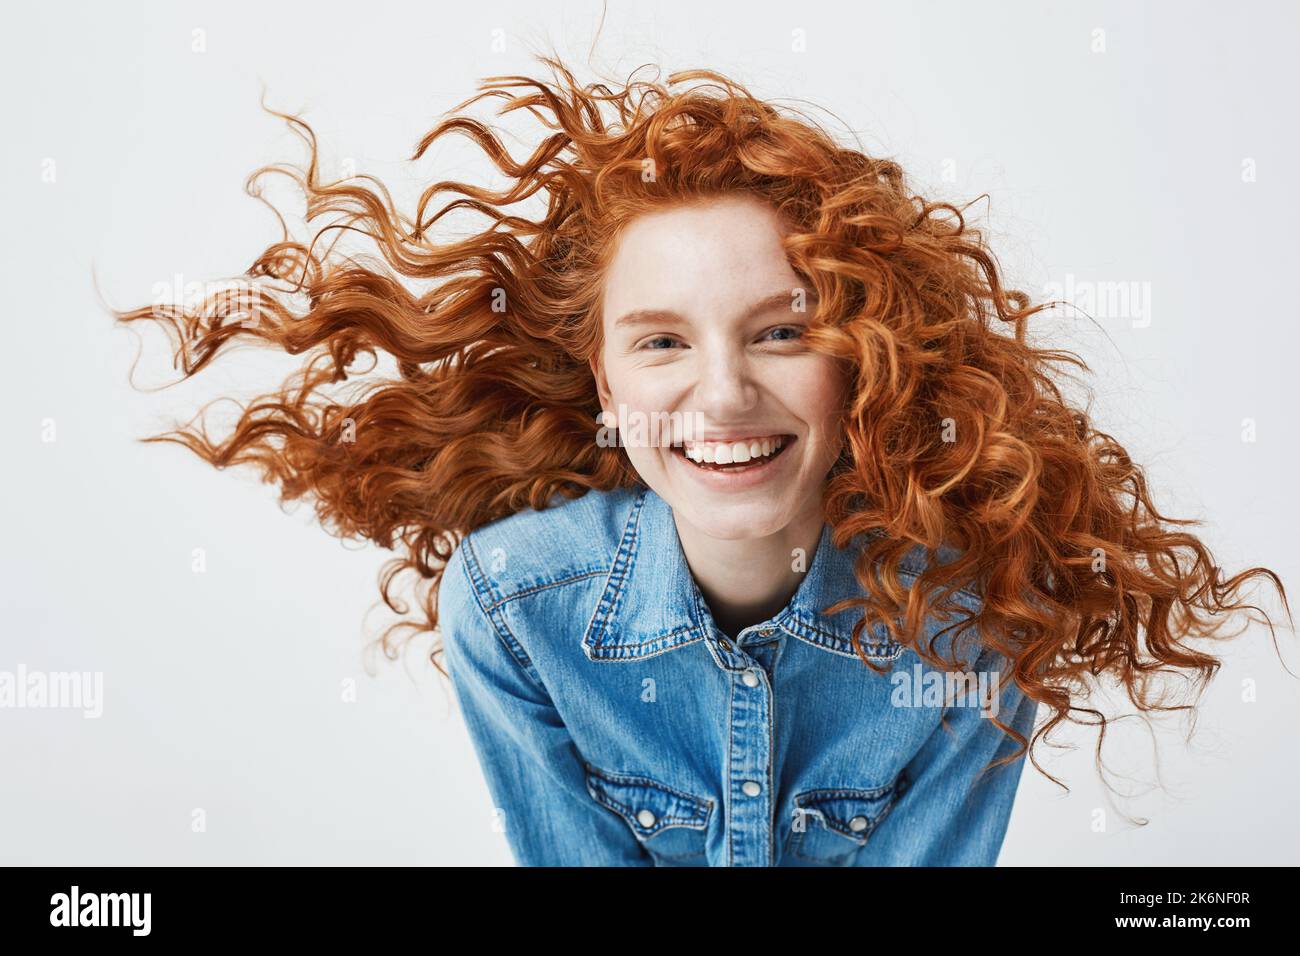 Portrait of beautiful happy cheerful redhead girl with flyingcurly hair smiling laughing looking at camera over white background. Stock Photo